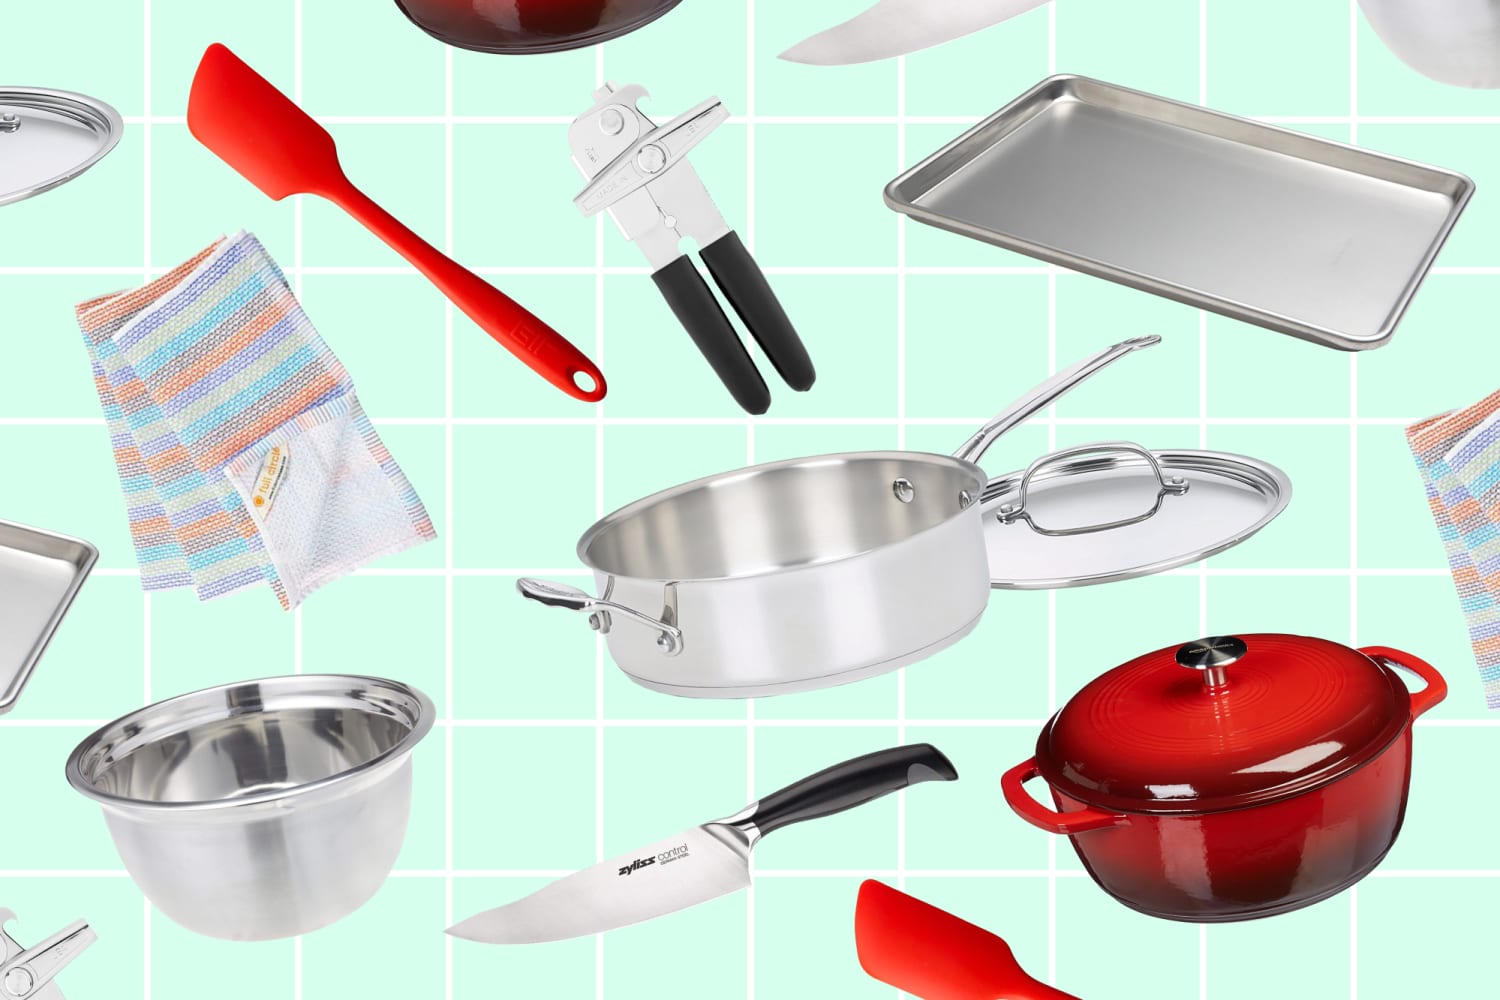 The Starter Kitchen: All The Cooking Utensils You Need - Forbes Vetted